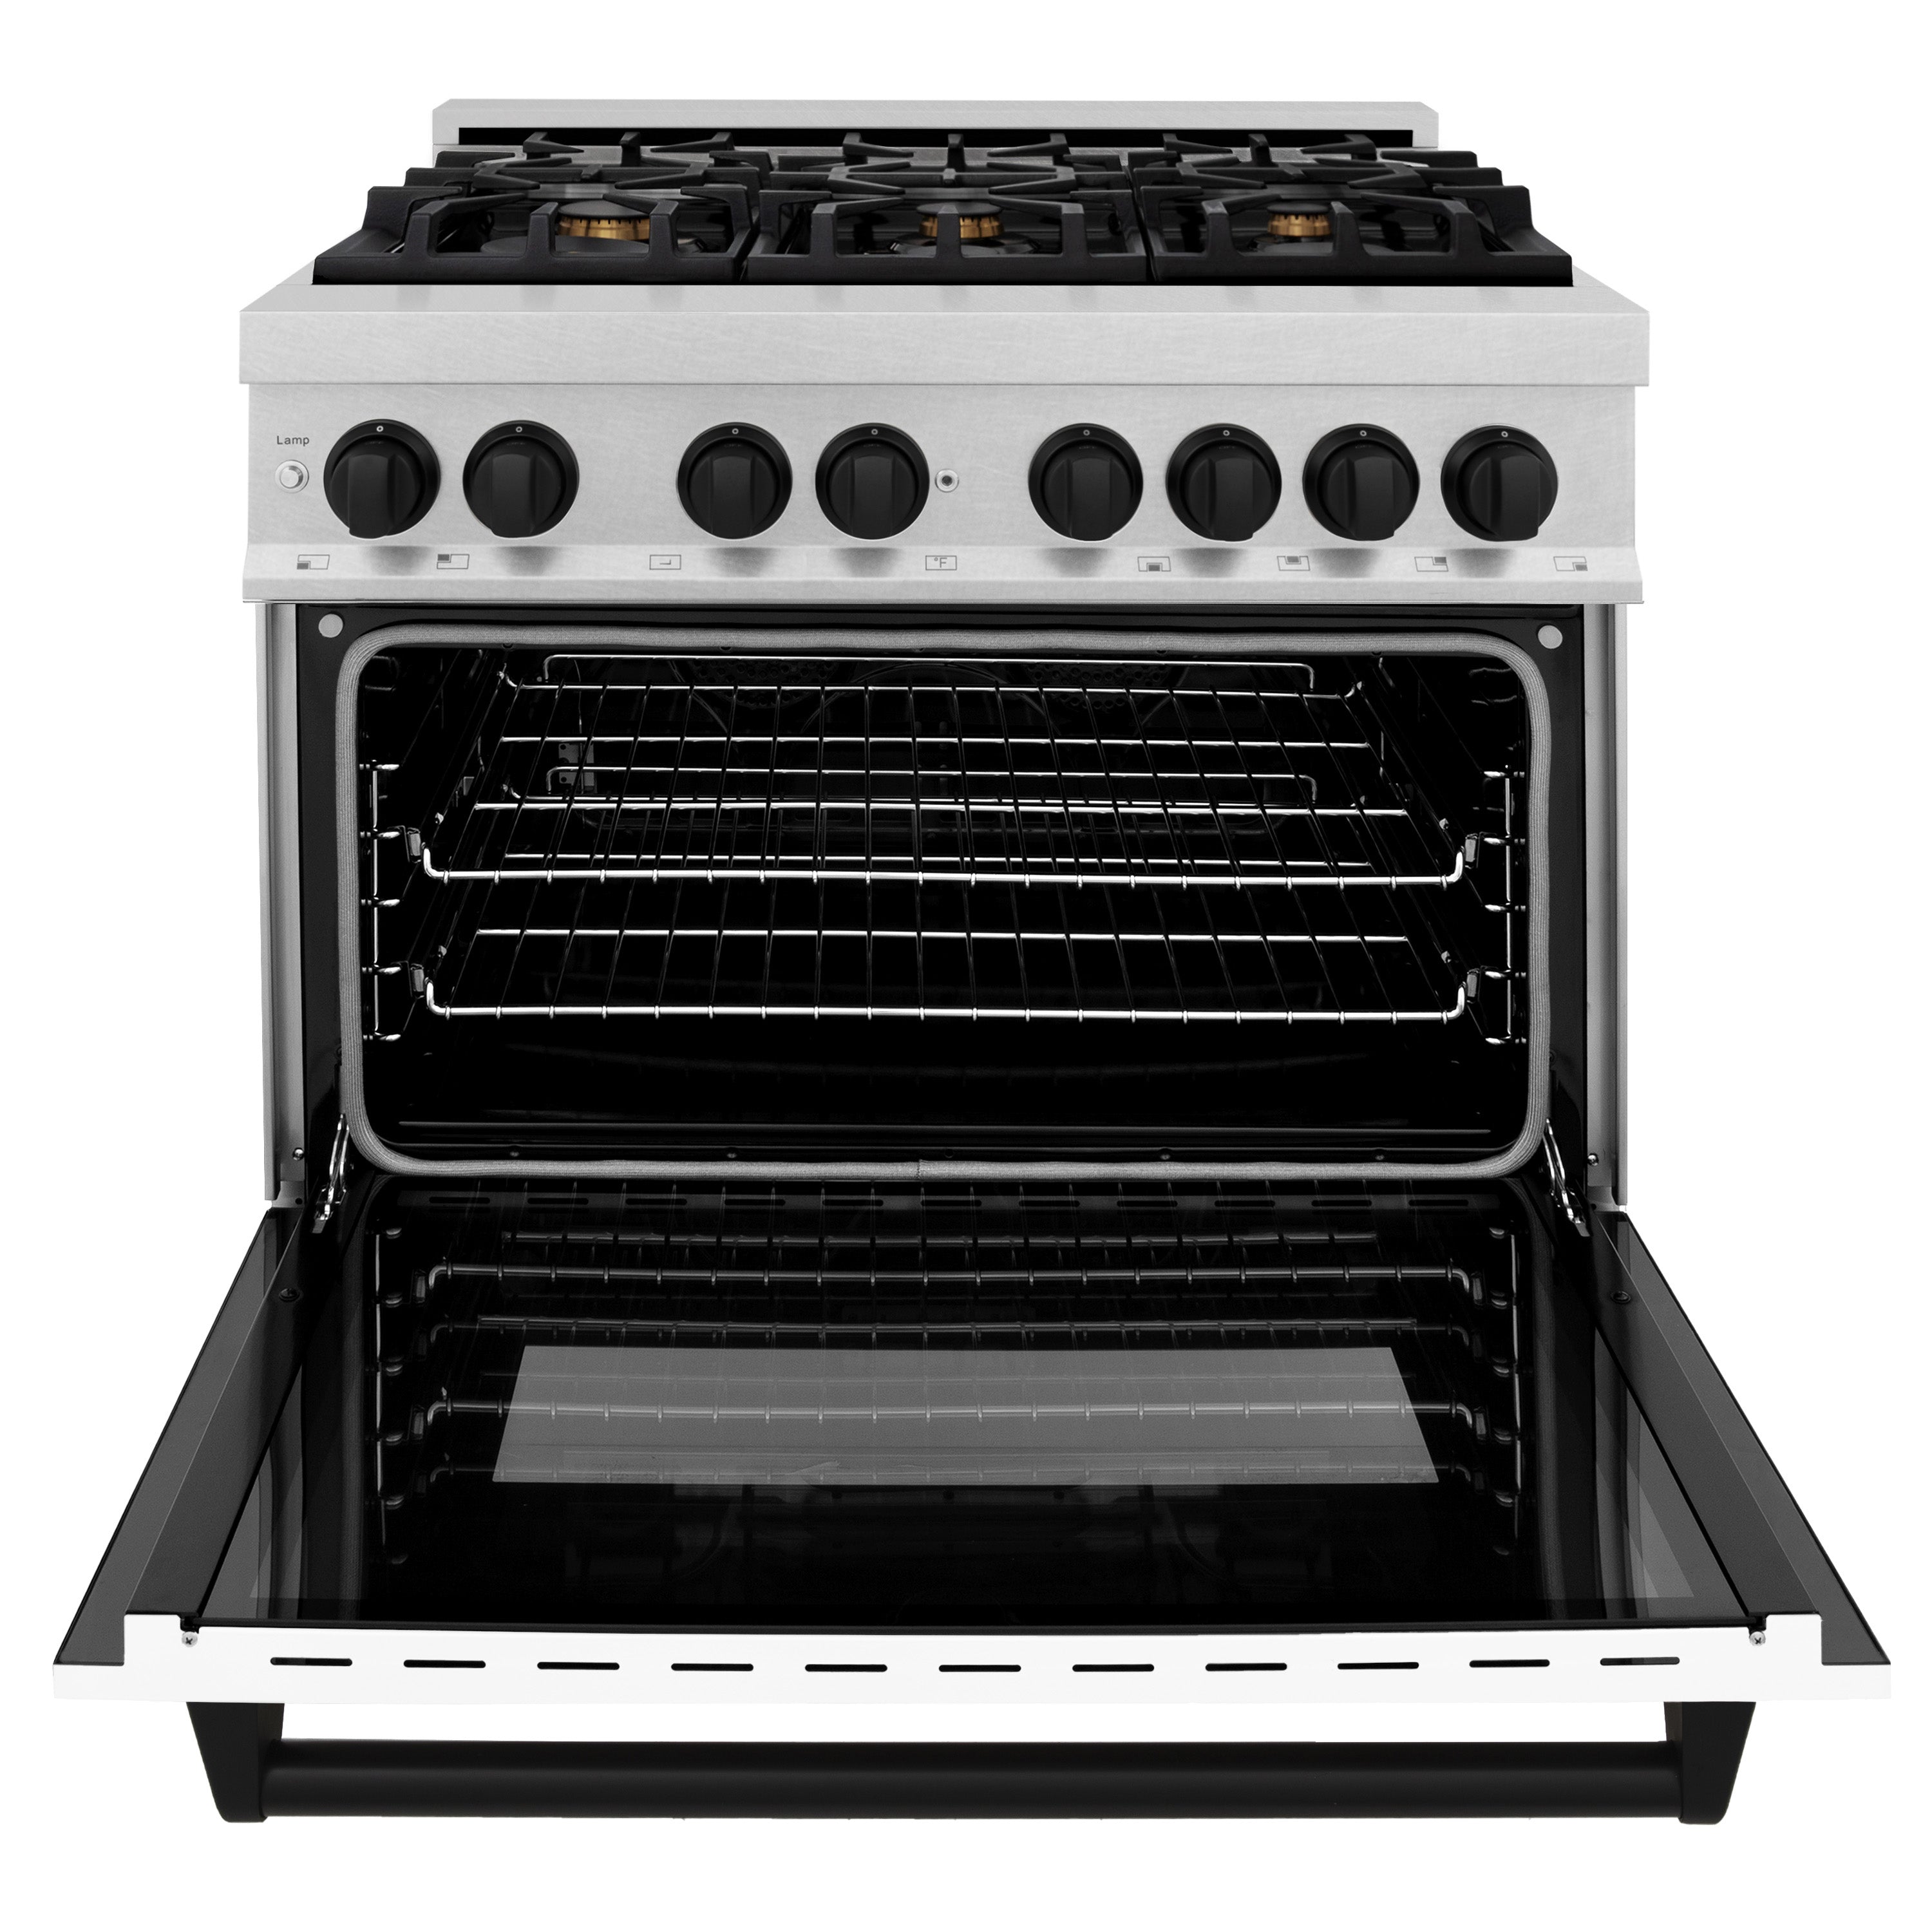 ZLINE Autograph Edition 36" 4.6 cu. ft. Dual Fuel Range with Gas Stove and Electric Oven in DuraSnow® Stainless Steel with White Matte Door and Matte Black Accents (RASZ-WM-36-MB)